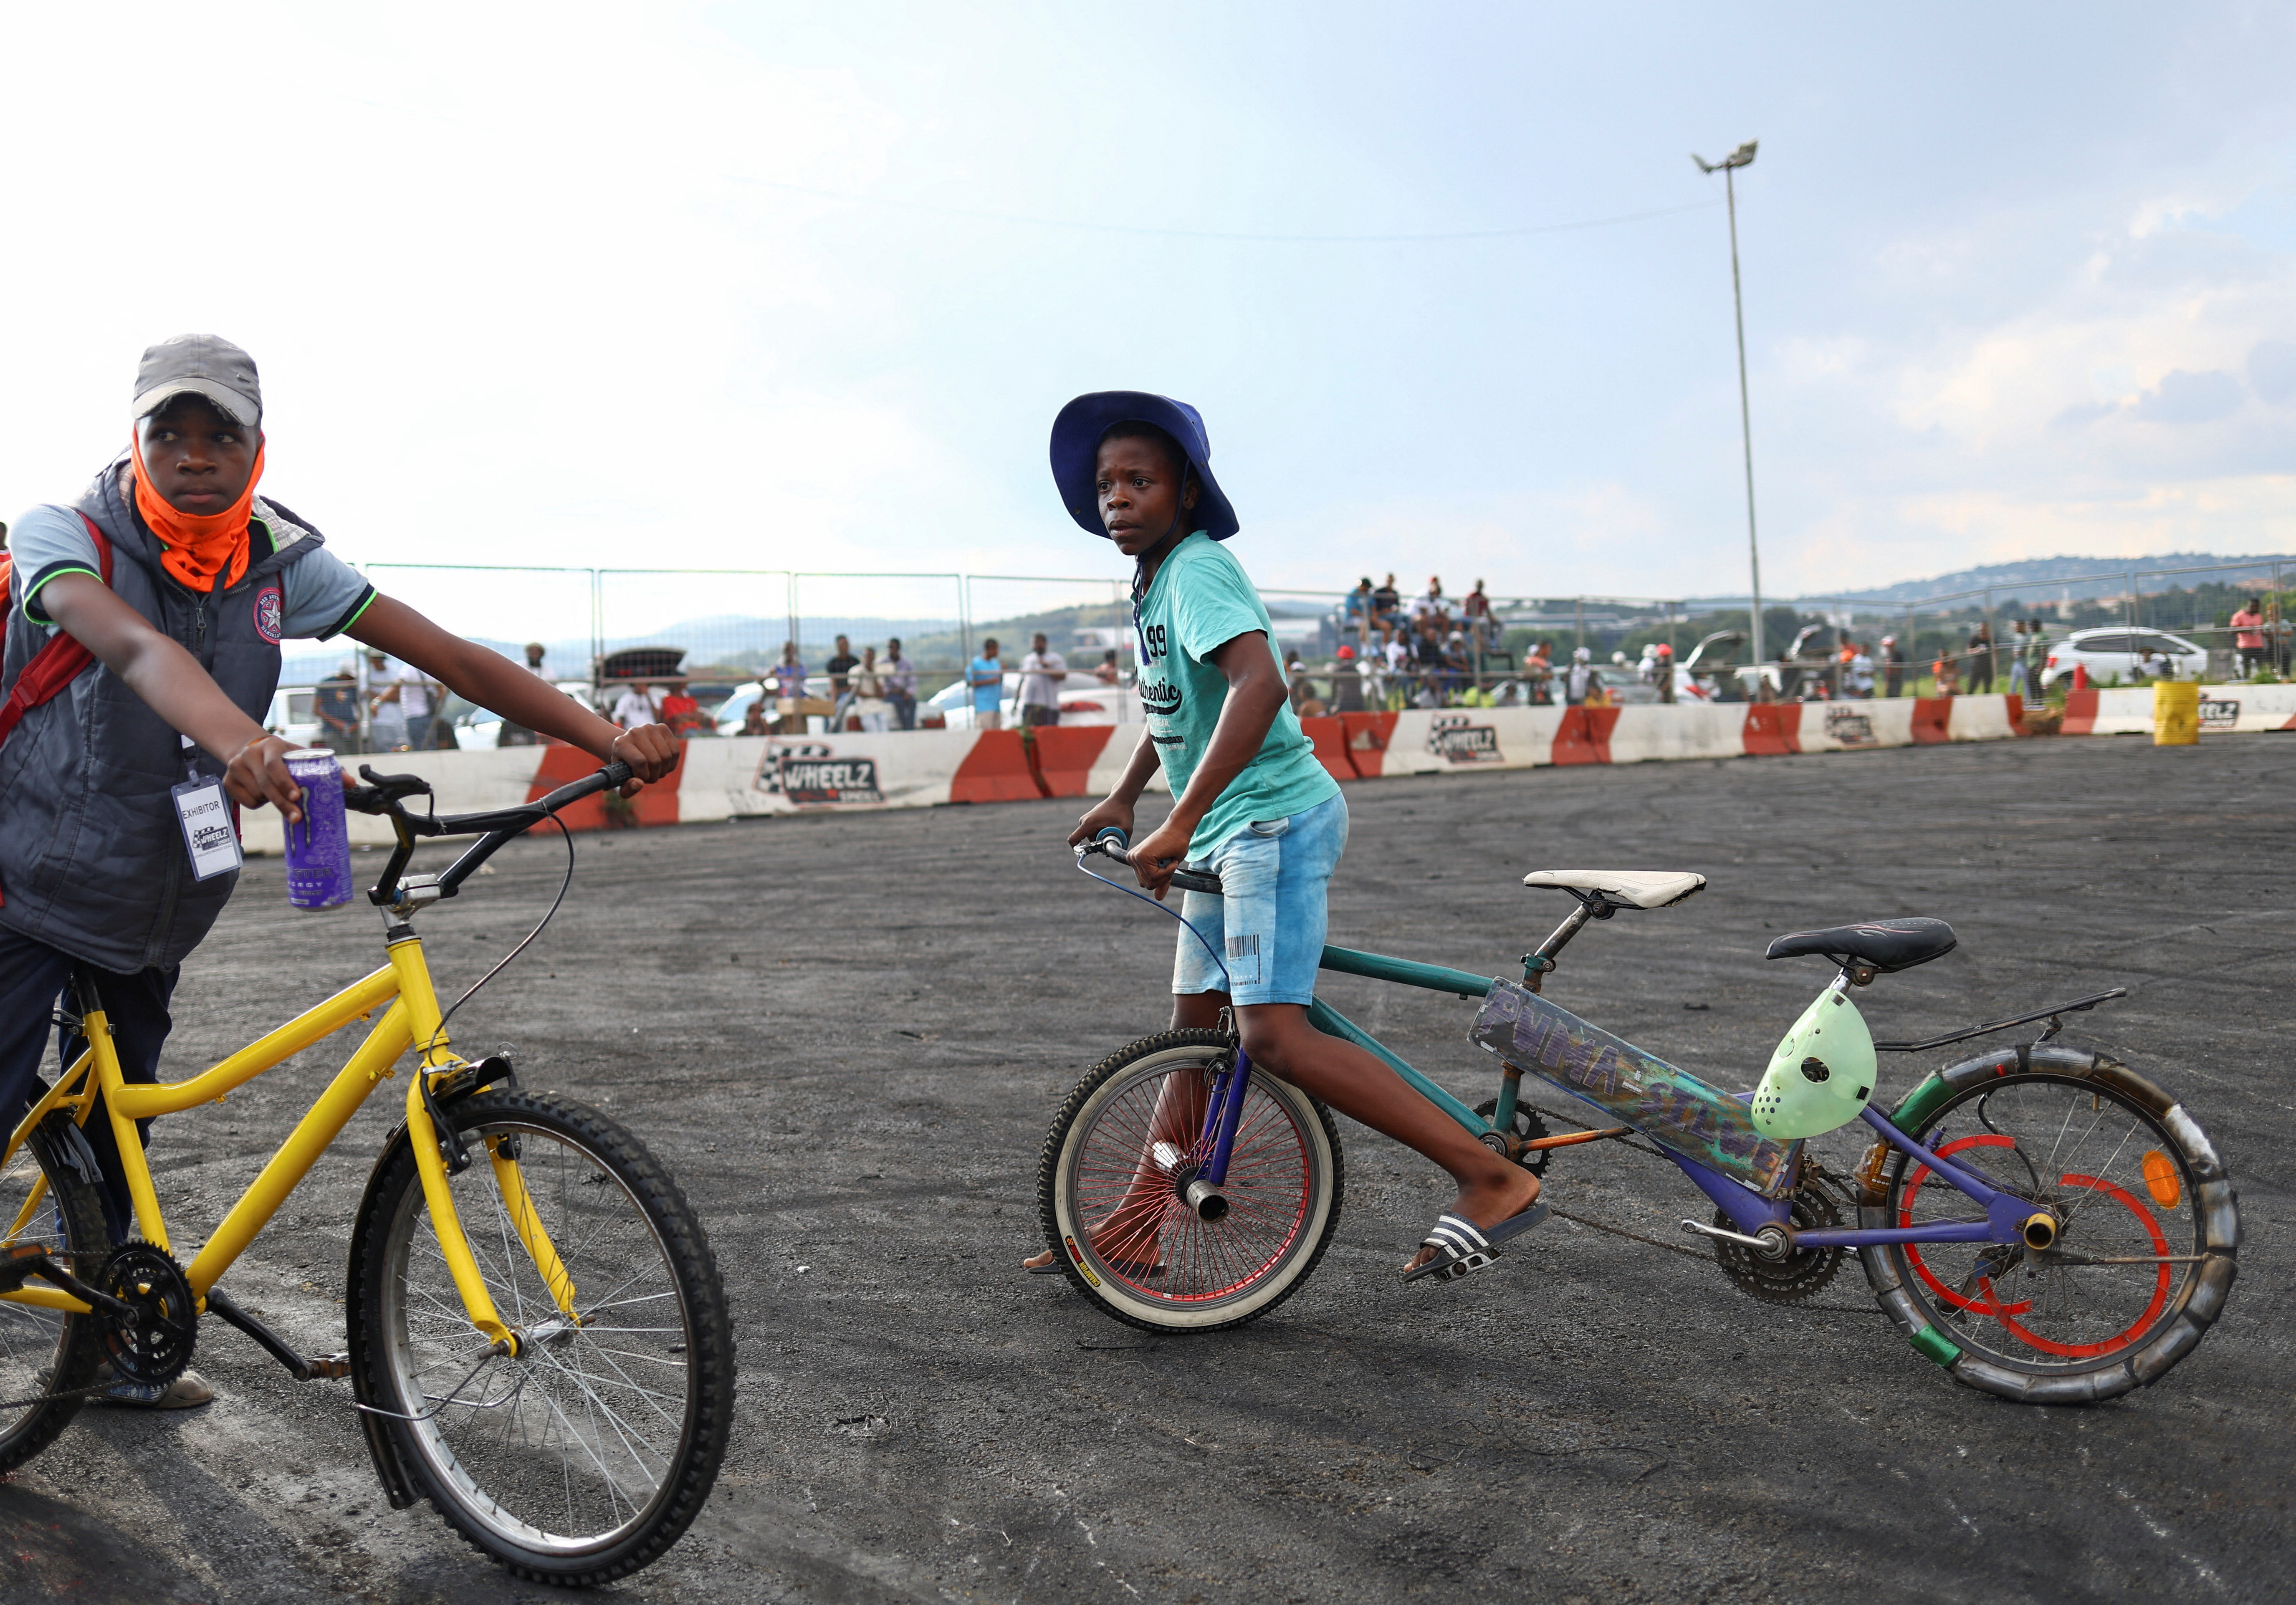 South African township boys spin bikes to stay out of trouble